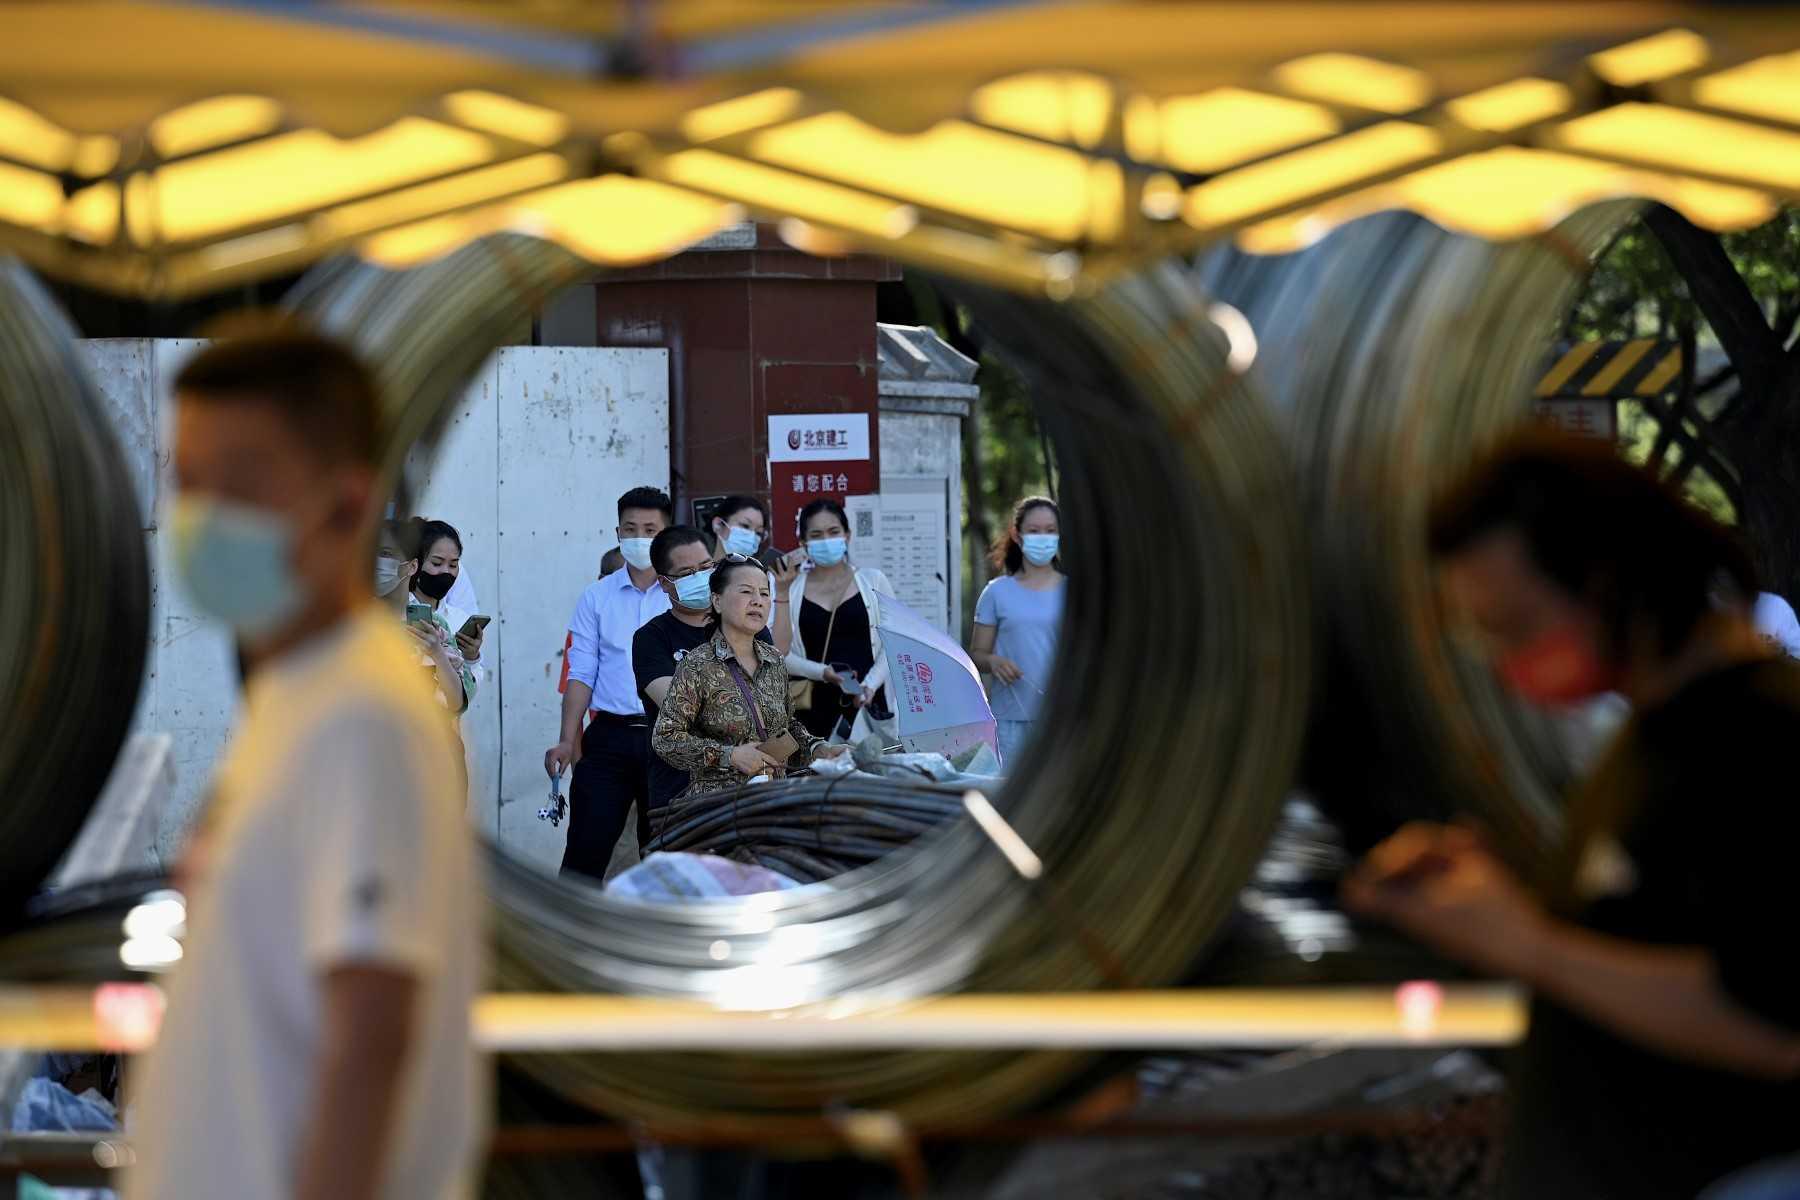 People queue to be tested for Covid-19 at a swab collection site in Beijing on July 7. Photo: AFP